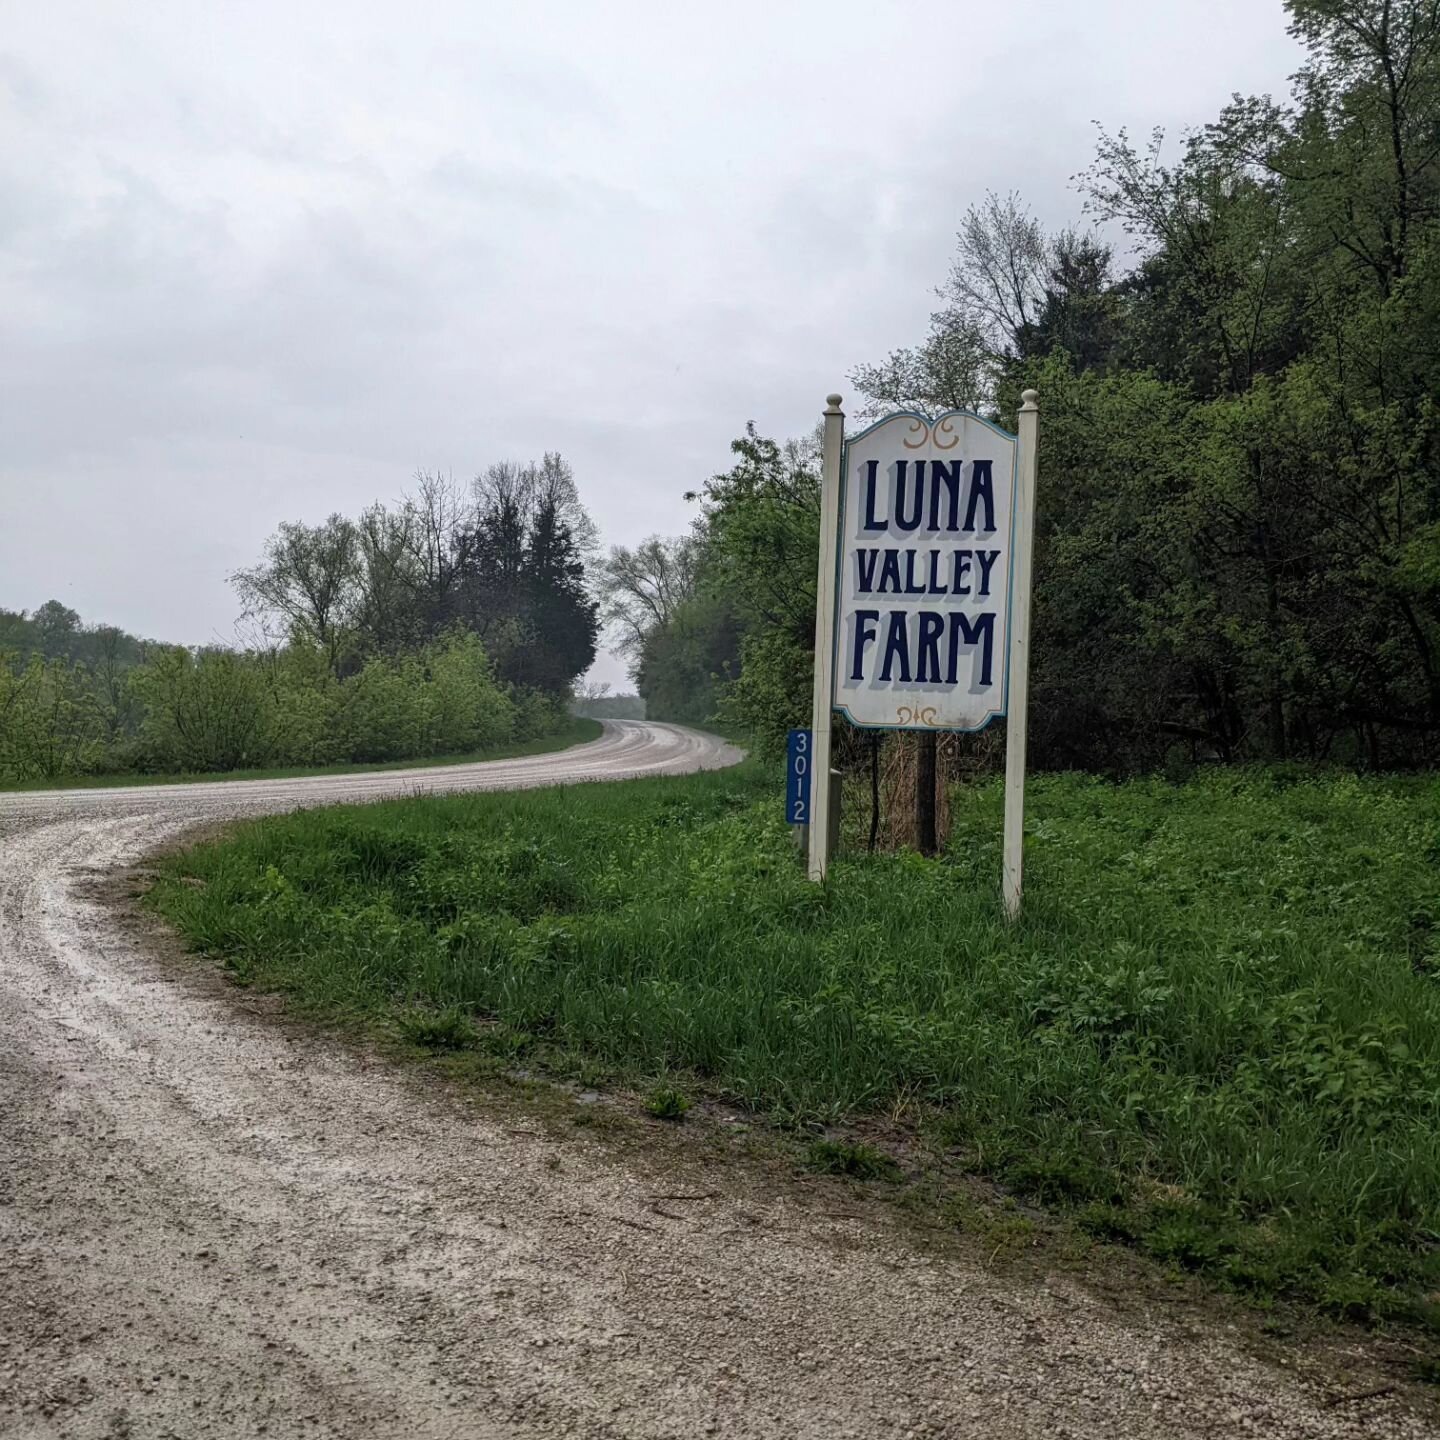 Favorite delivery time. (One of)  Our favorite spots in the whole state to deliver is a short drive from Decorah (got to get out on some good Iowa gravel) @lunavalleyfarm is a pizza farm that's only open Friday and Saturdays in the summer. We're exci